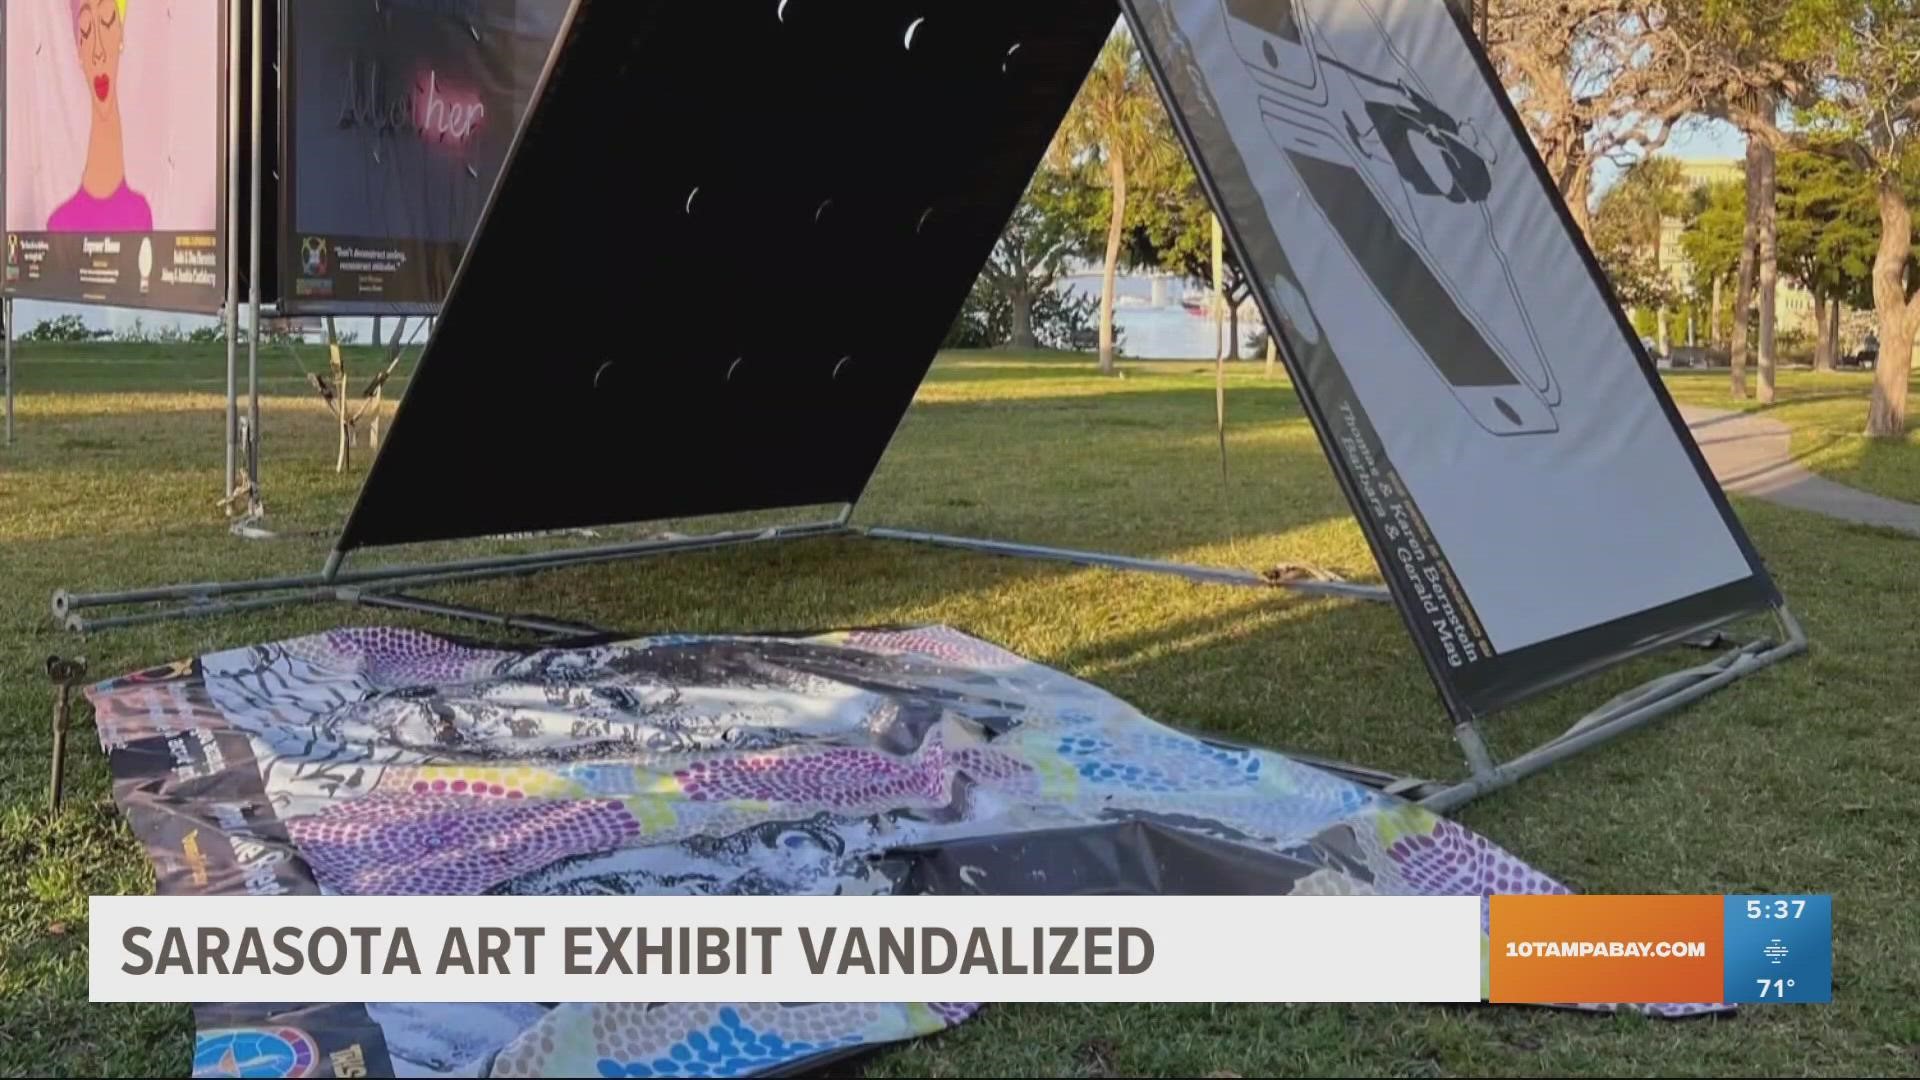 Organizers plan to reprint the artwork and replace it by Monday.